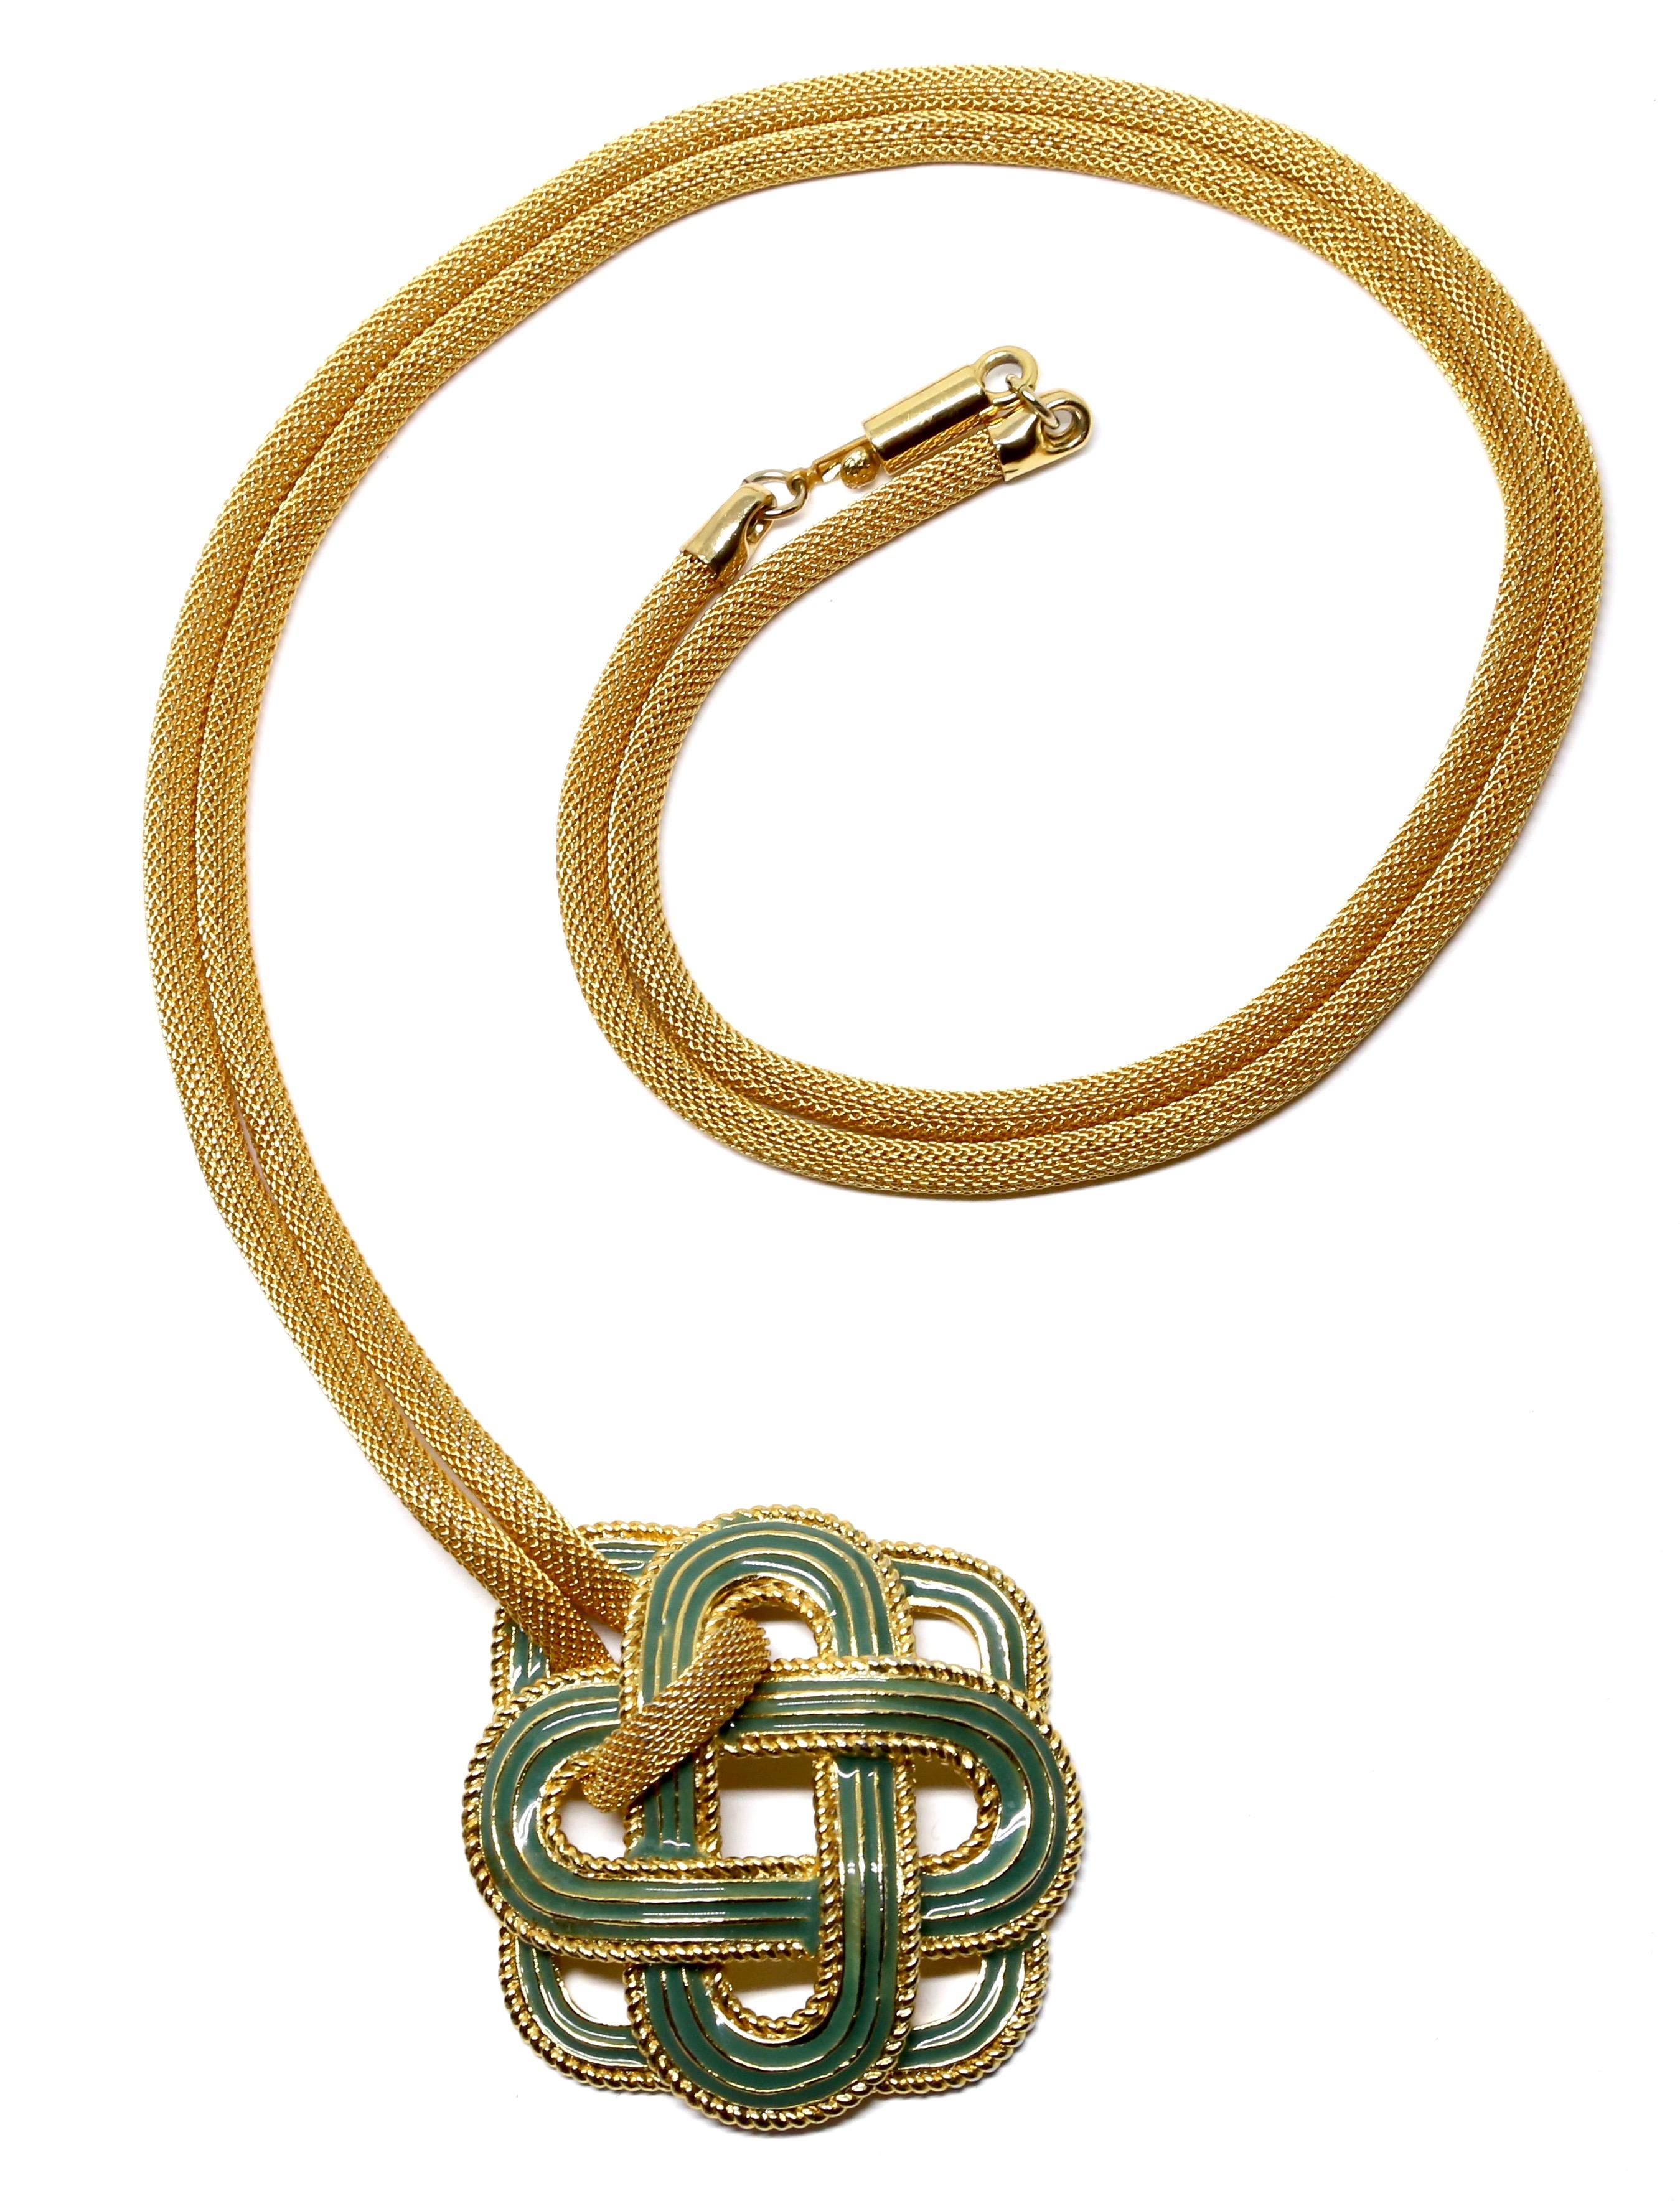 Striking, gilt-metal and turquoise-blue enameled pendant strung on a long gilt-metal woven rope chain from Lanvin dating to the 1970's. Pendant measures approximately 2.25